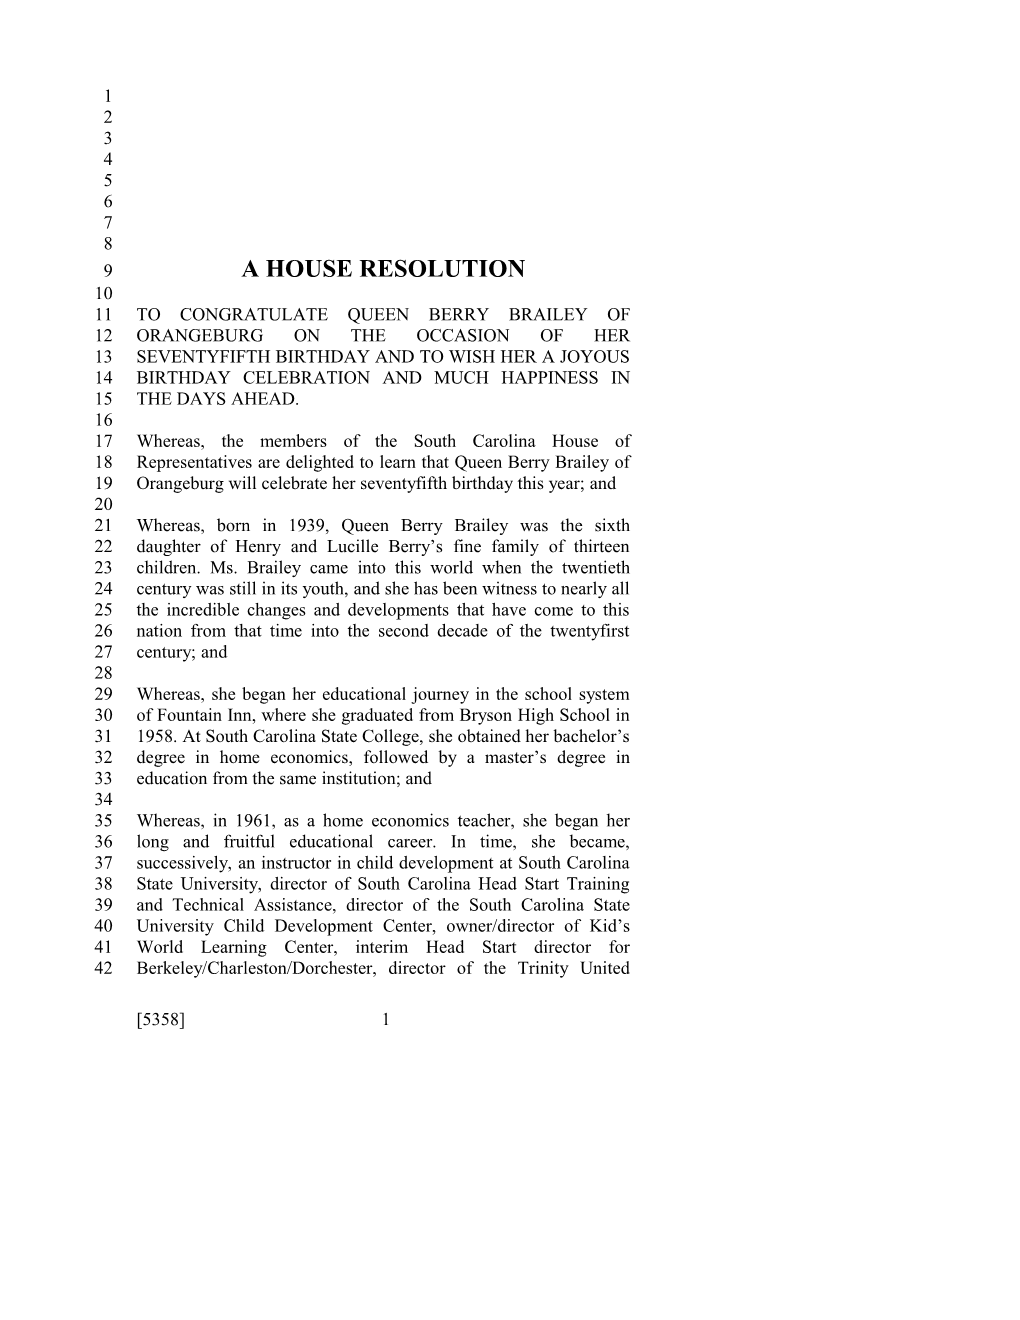 A House Resolution s12